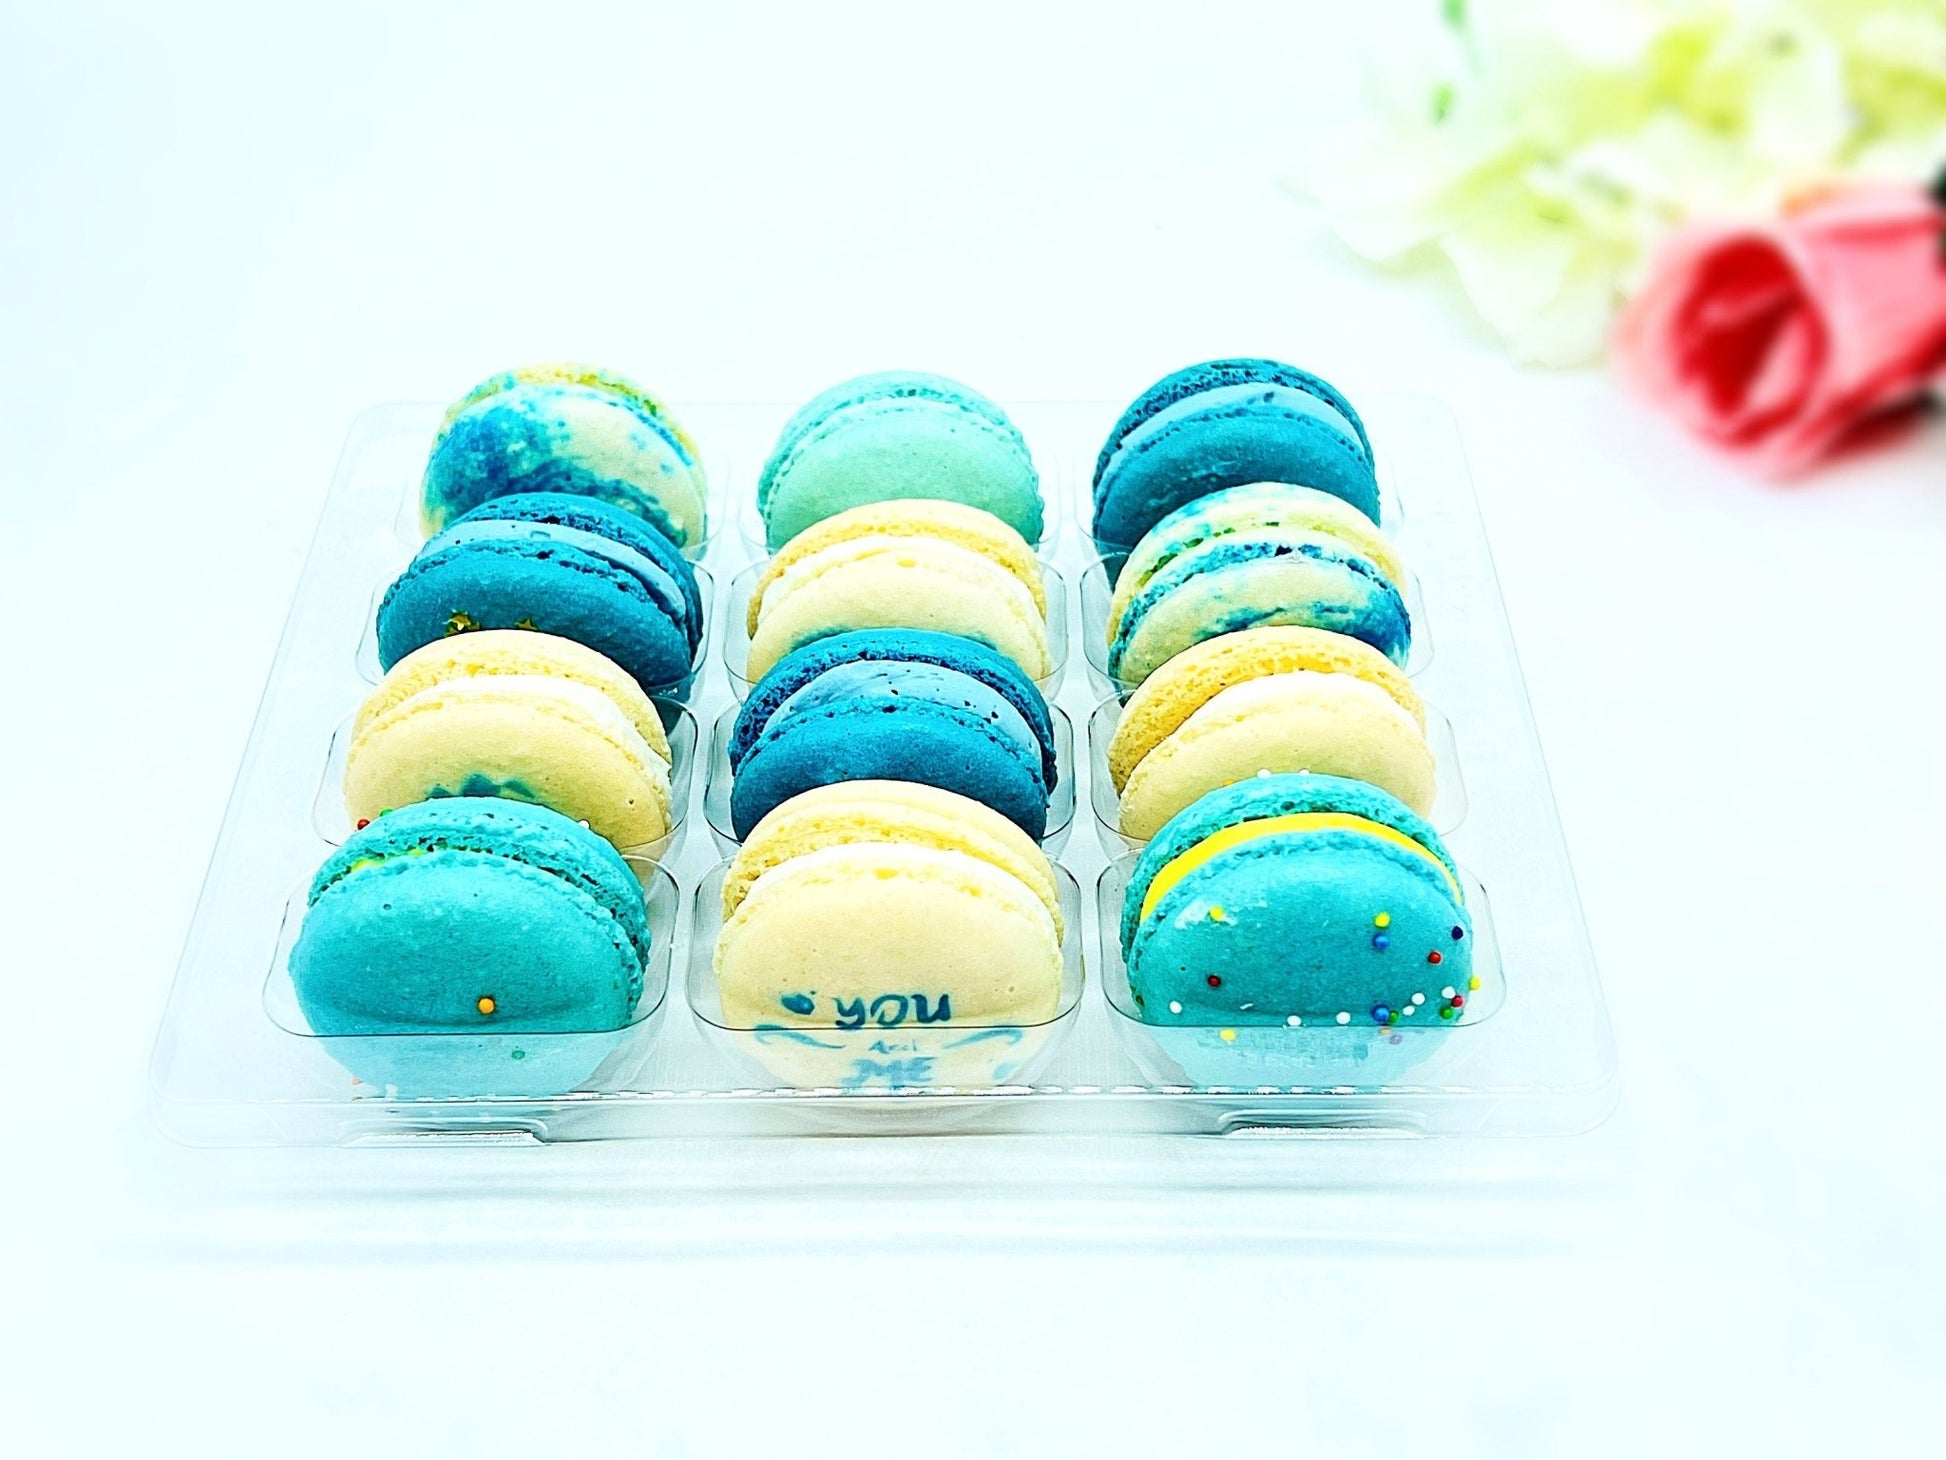 The Blue Love Macarons | 12 French Macarons Set - Macaron Centrale